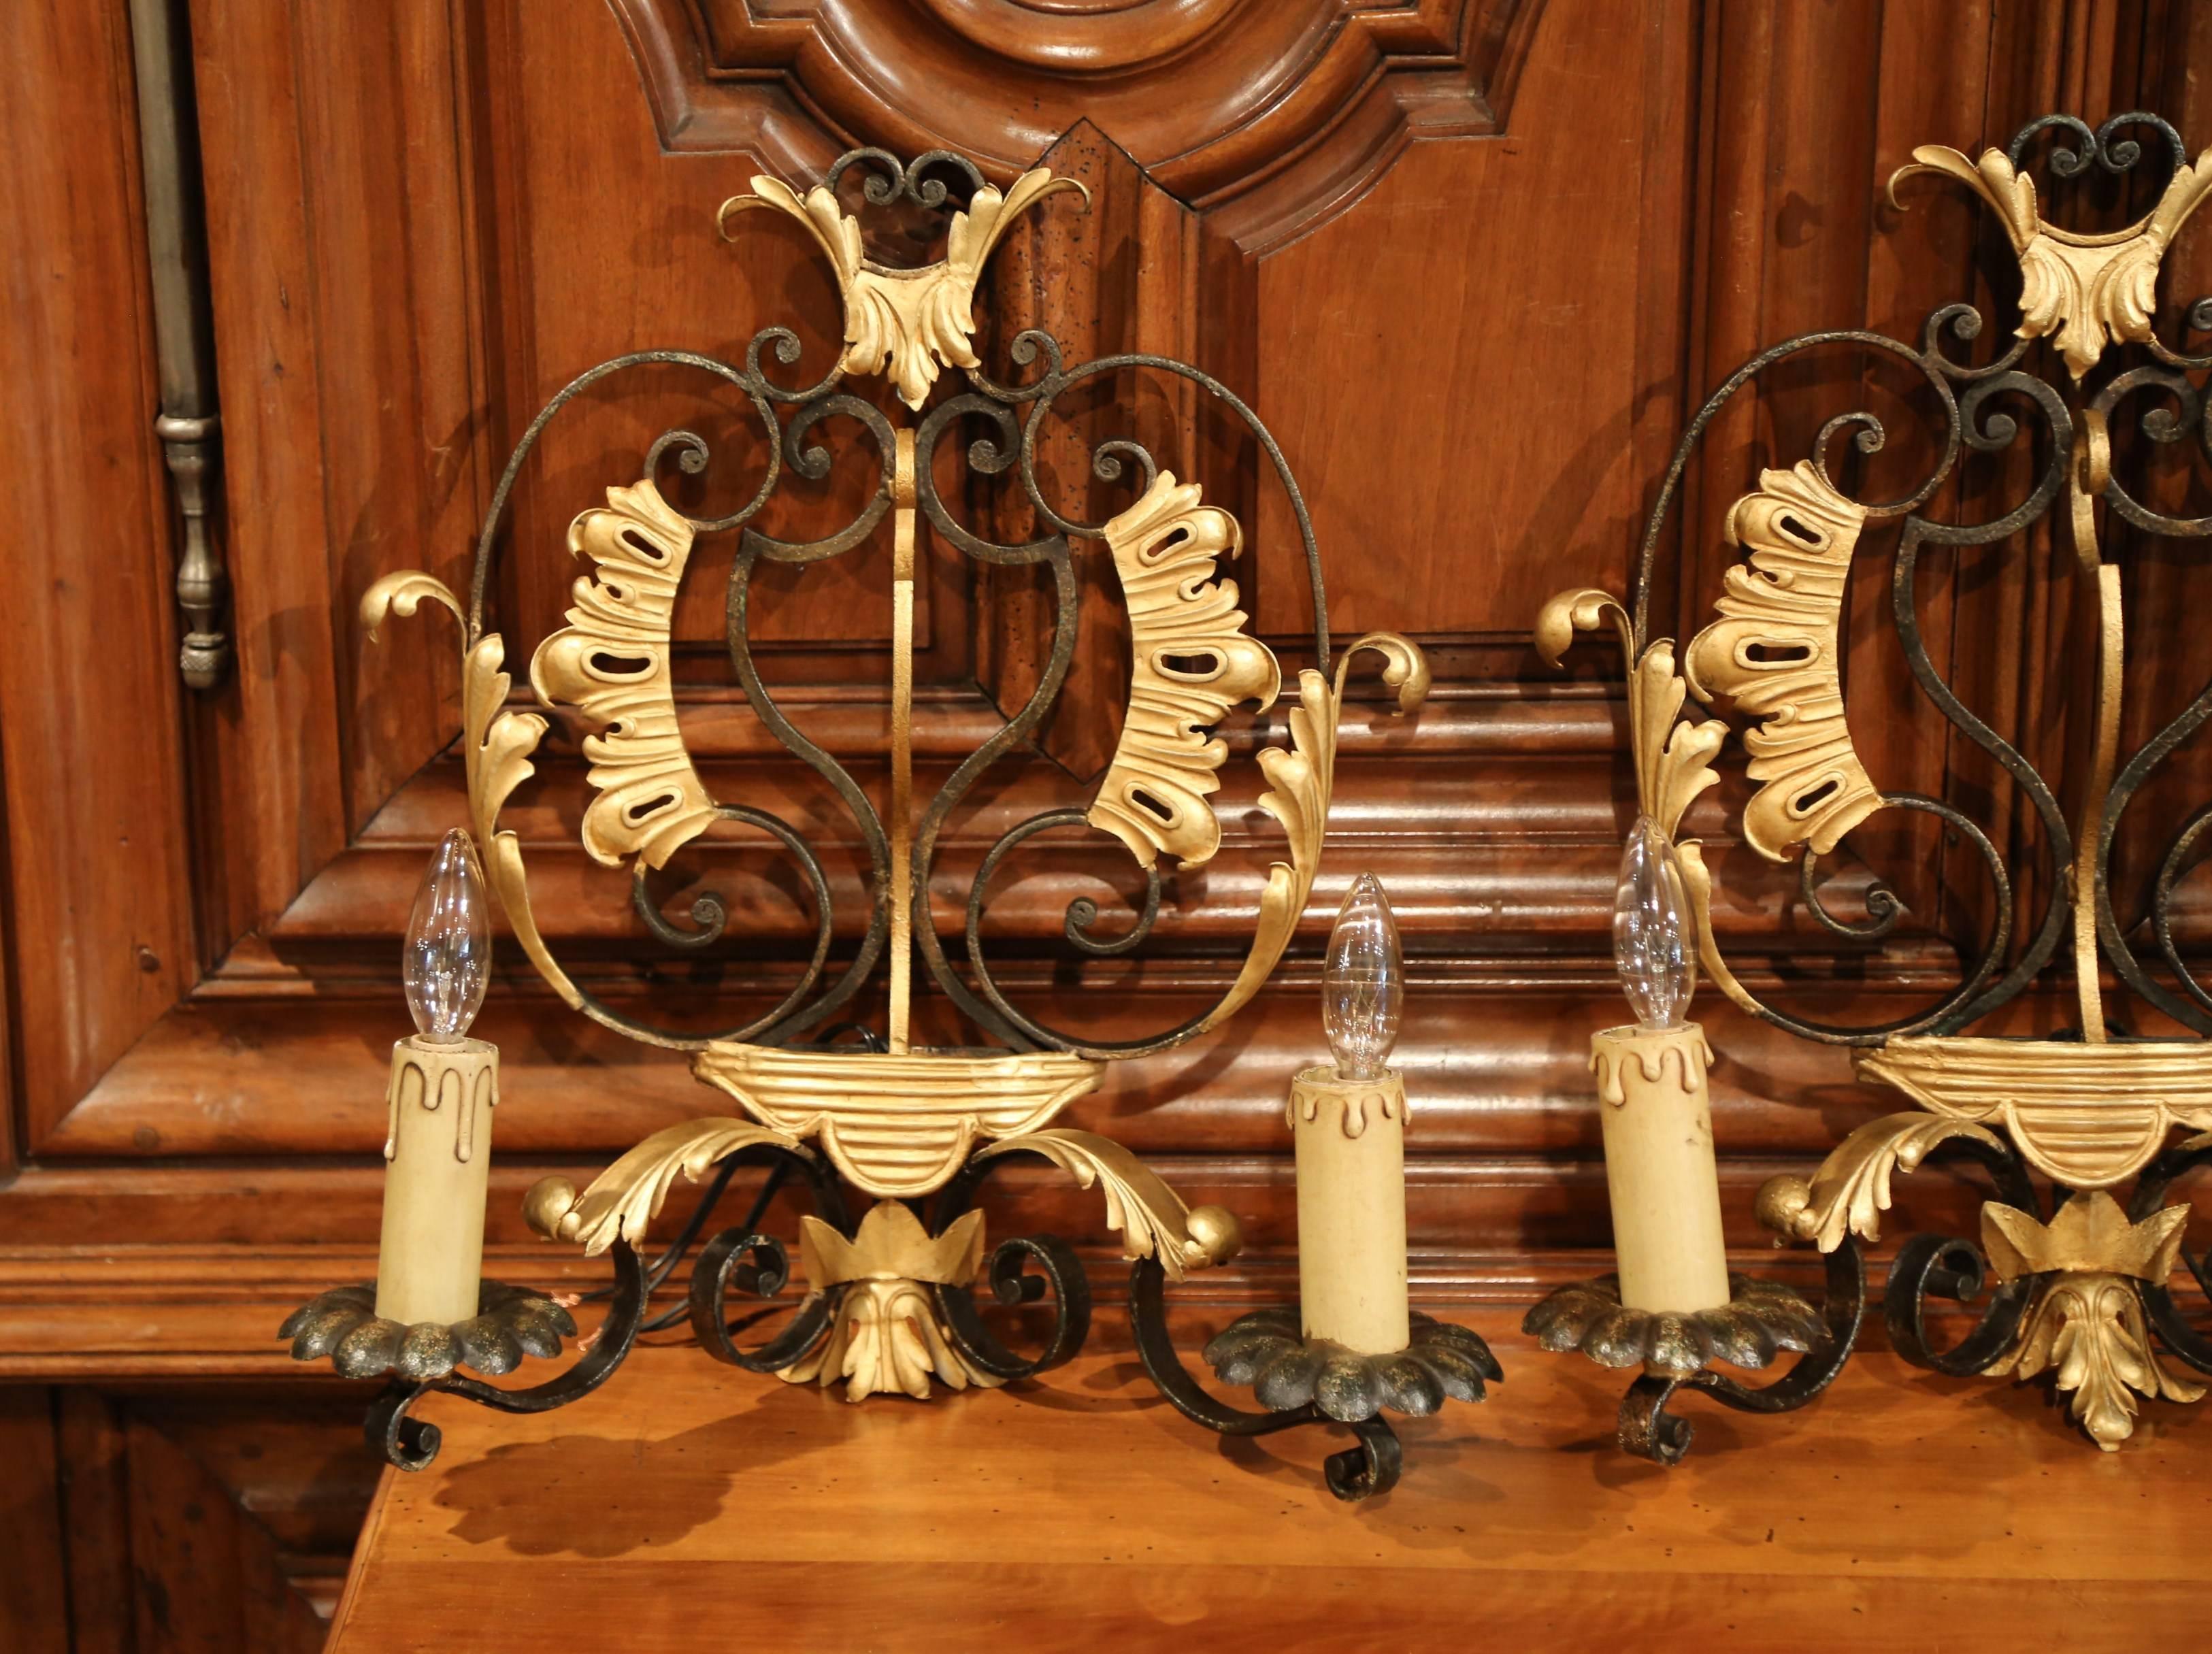 These matching antique wall sconces were crafted in France, circa 1920. Each sconce features two arms with newly wired lights over the original wood candle sleeves with drip; the back has painted leaves and decorative scrolled work. Both wall lights